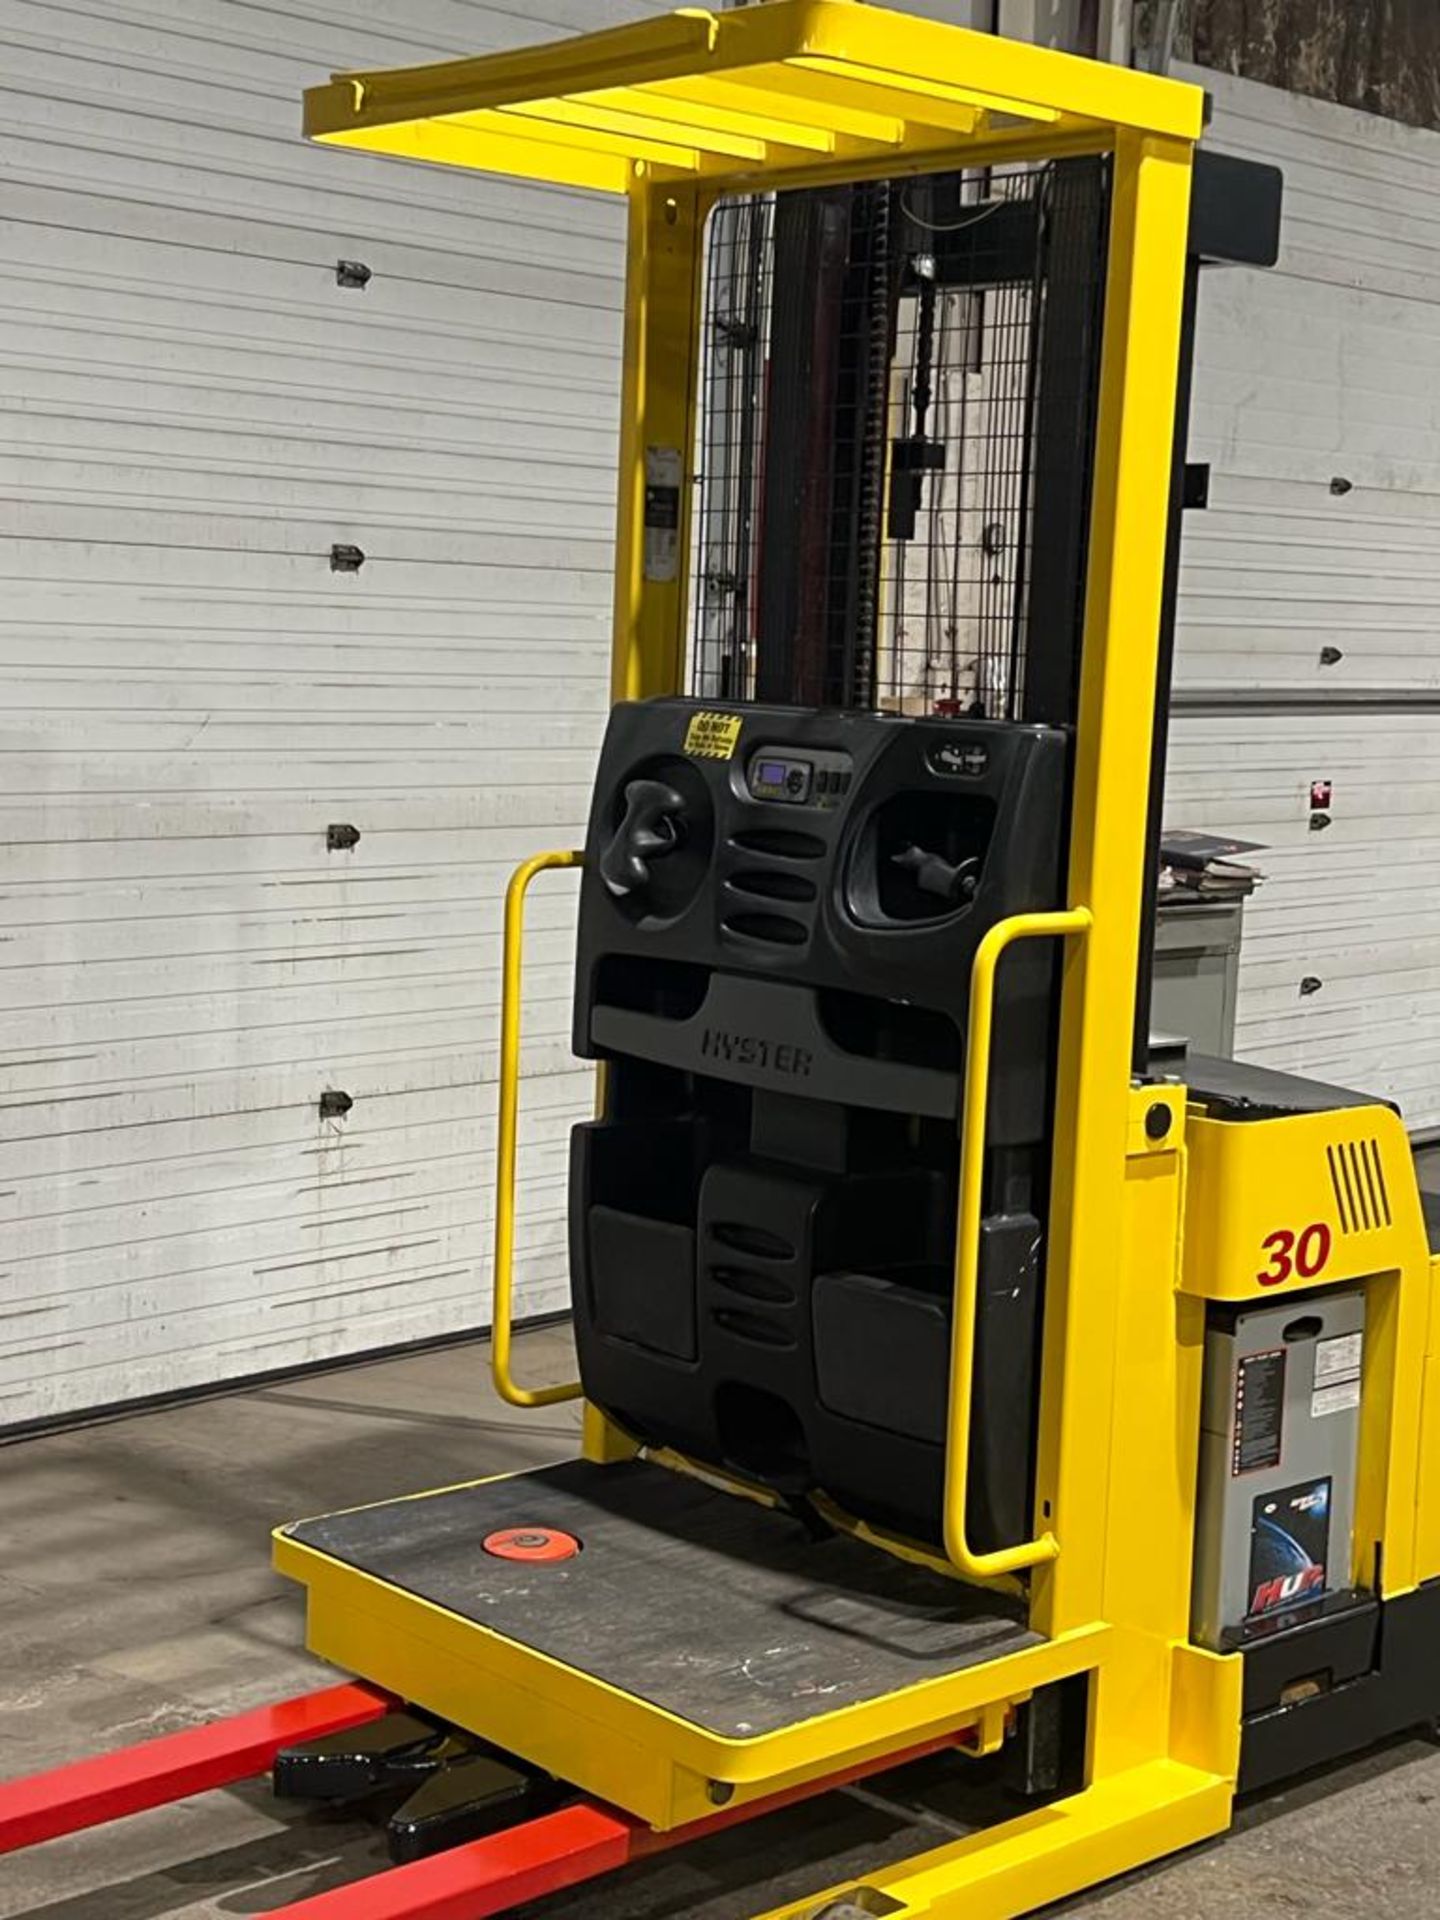 2015 Hyster Order Picker 3000lbs capacity electric Powered Pallet Cart 24V battery - FREE CUSTOMS - Image 4 of 4